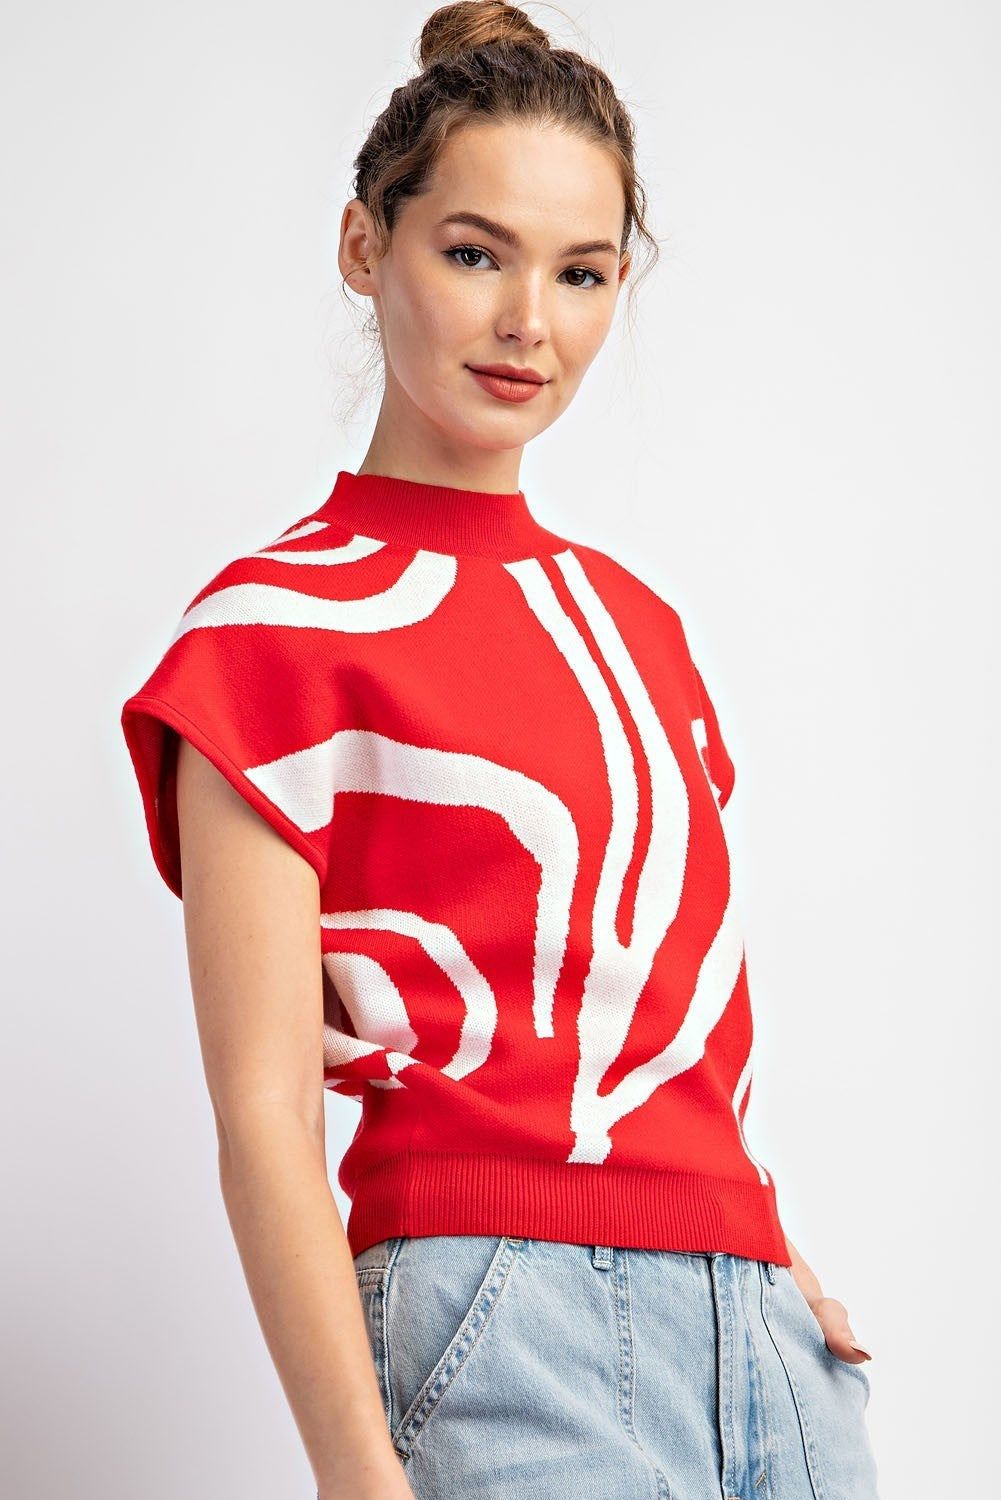 Swirl Printed Mock Neck Top - 2 Color Options - Available Small Through Extended Sizes